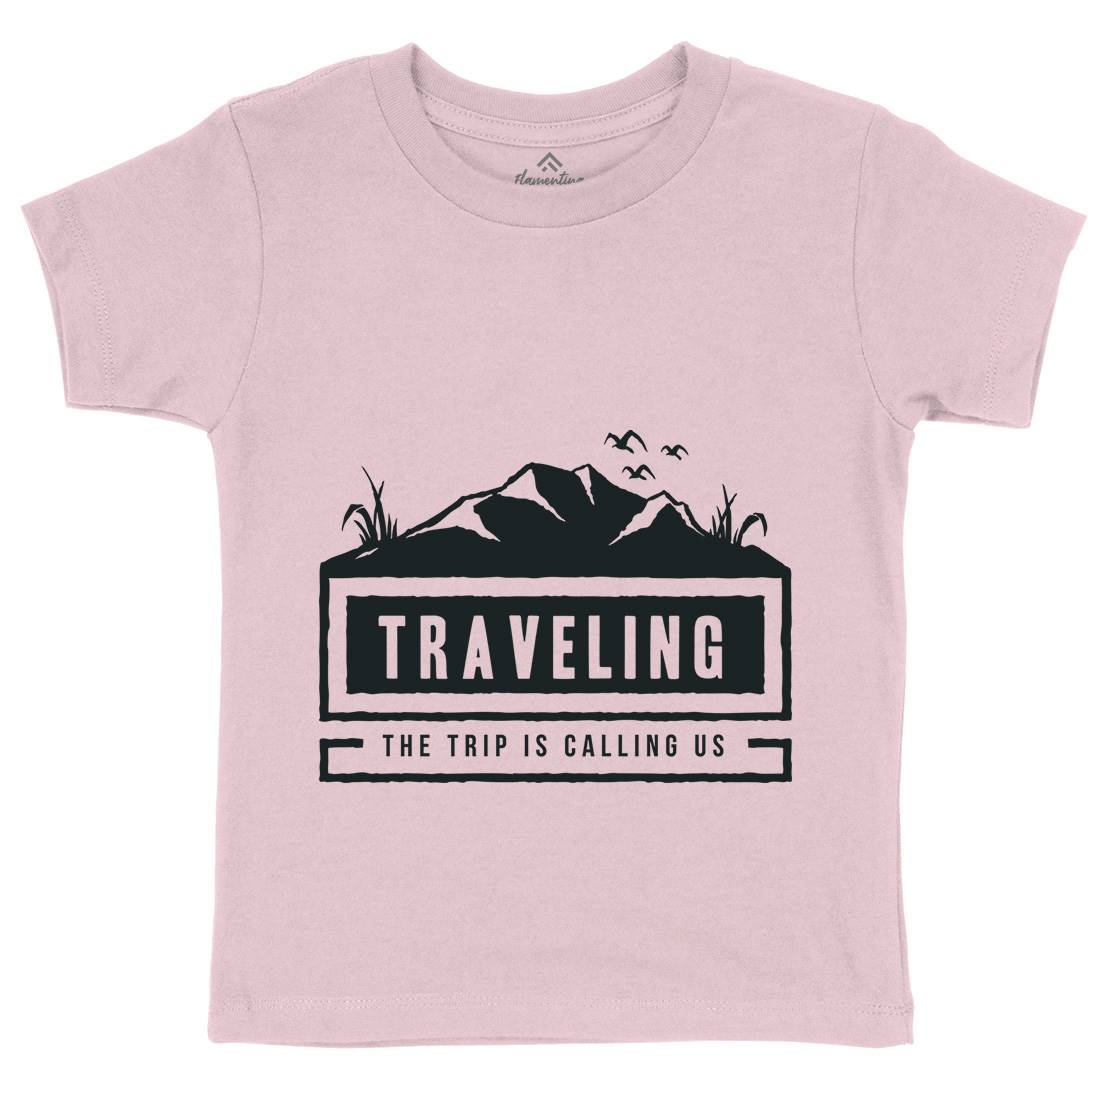 Traveling Outdoor Kids Crew Neck T-Shirt Nature A389